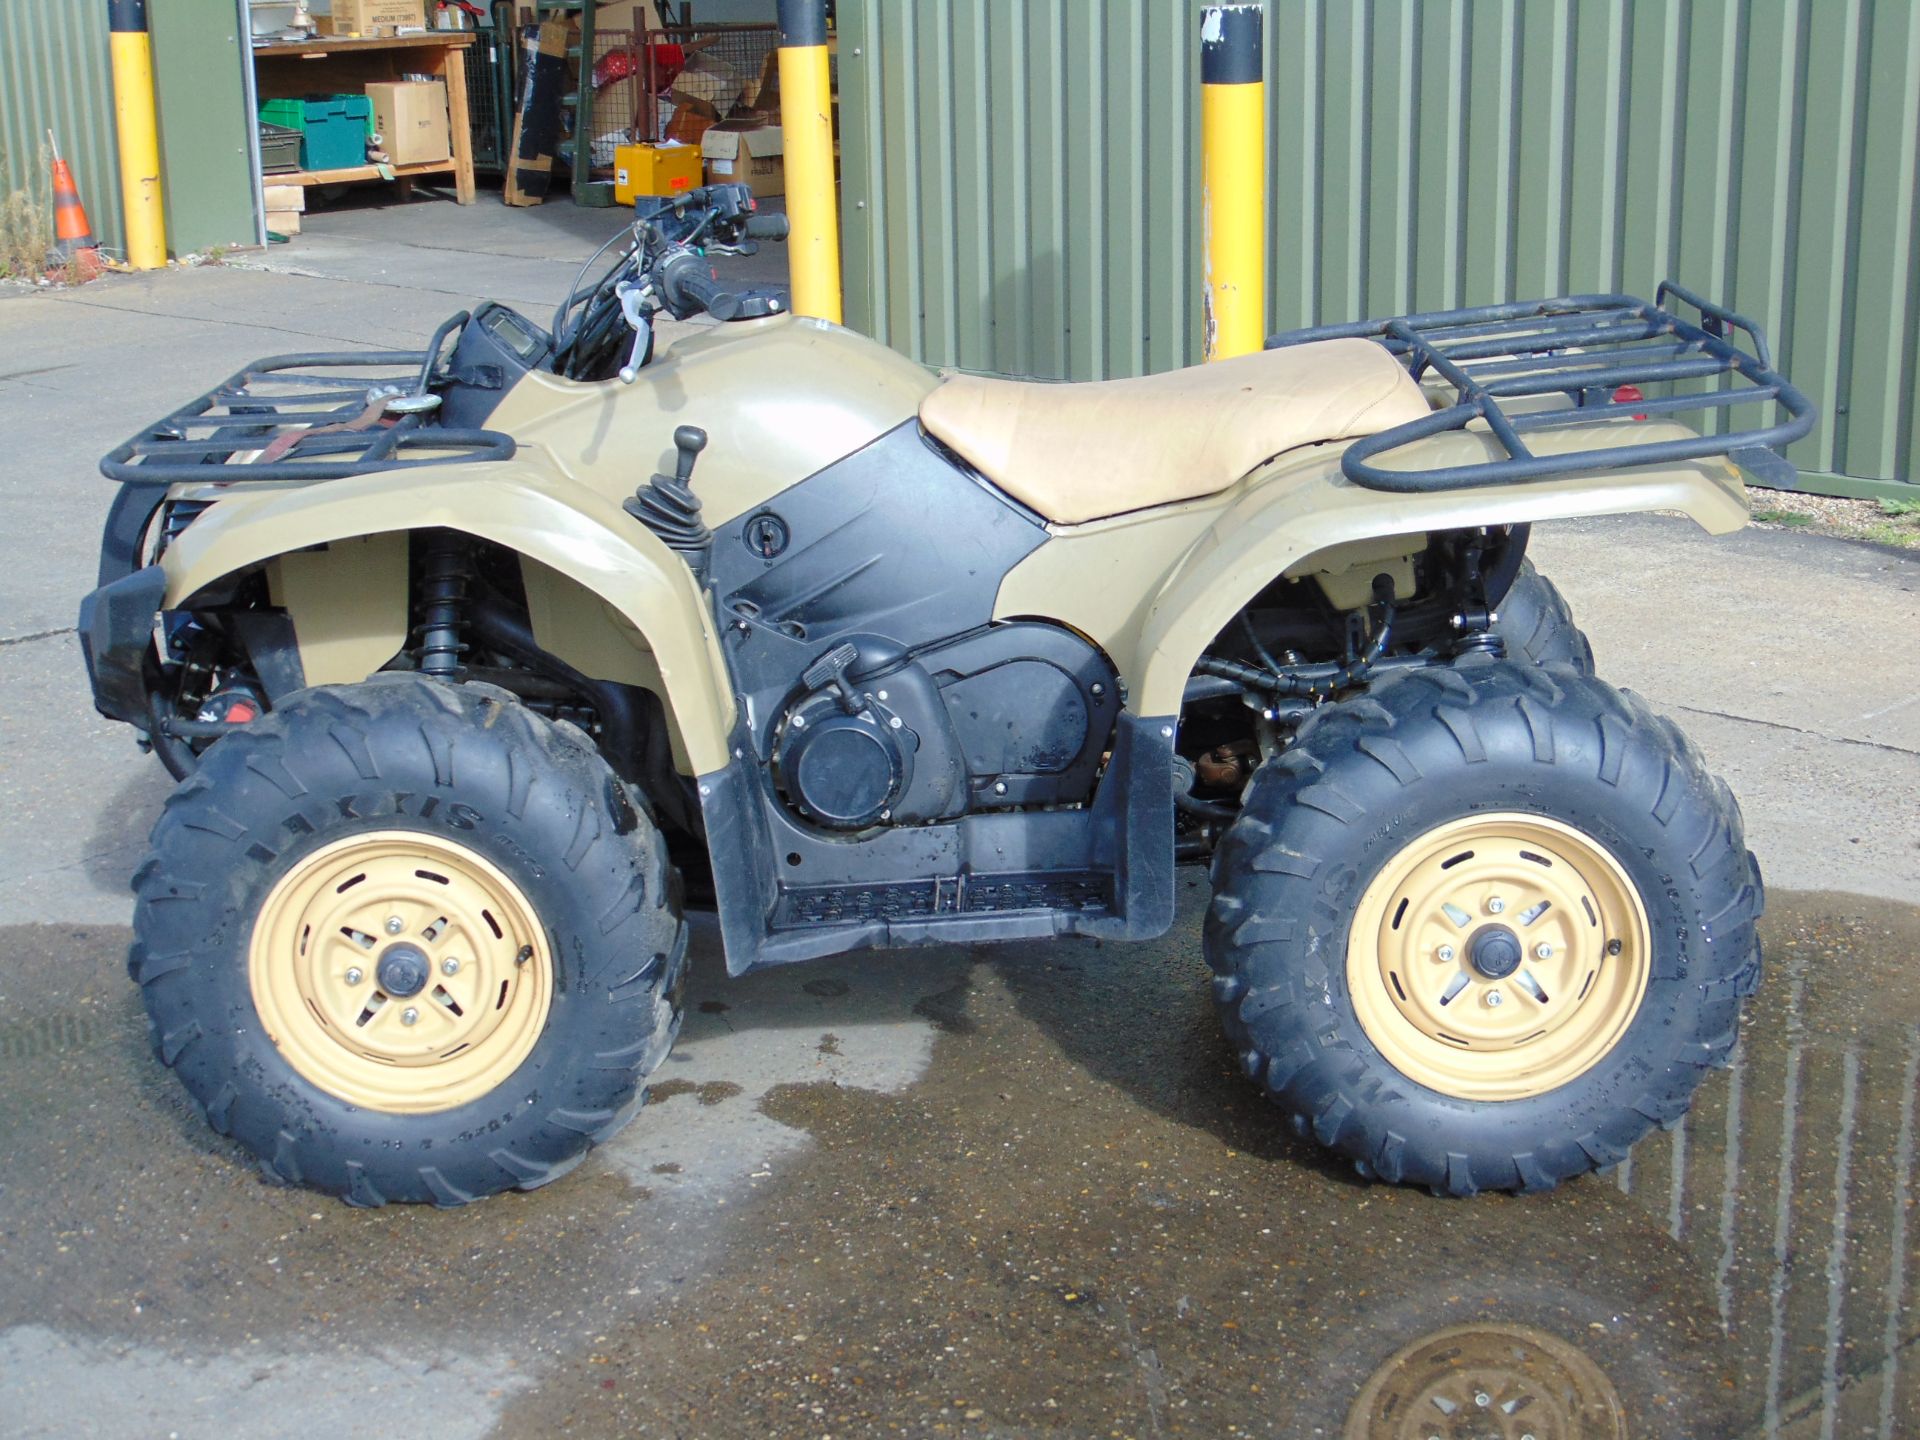 Military Specification Yamaha Grizzly 450 4 x 4 ATV Quad Bike ONLY 214 HOURS!!! - Image 5 of 22